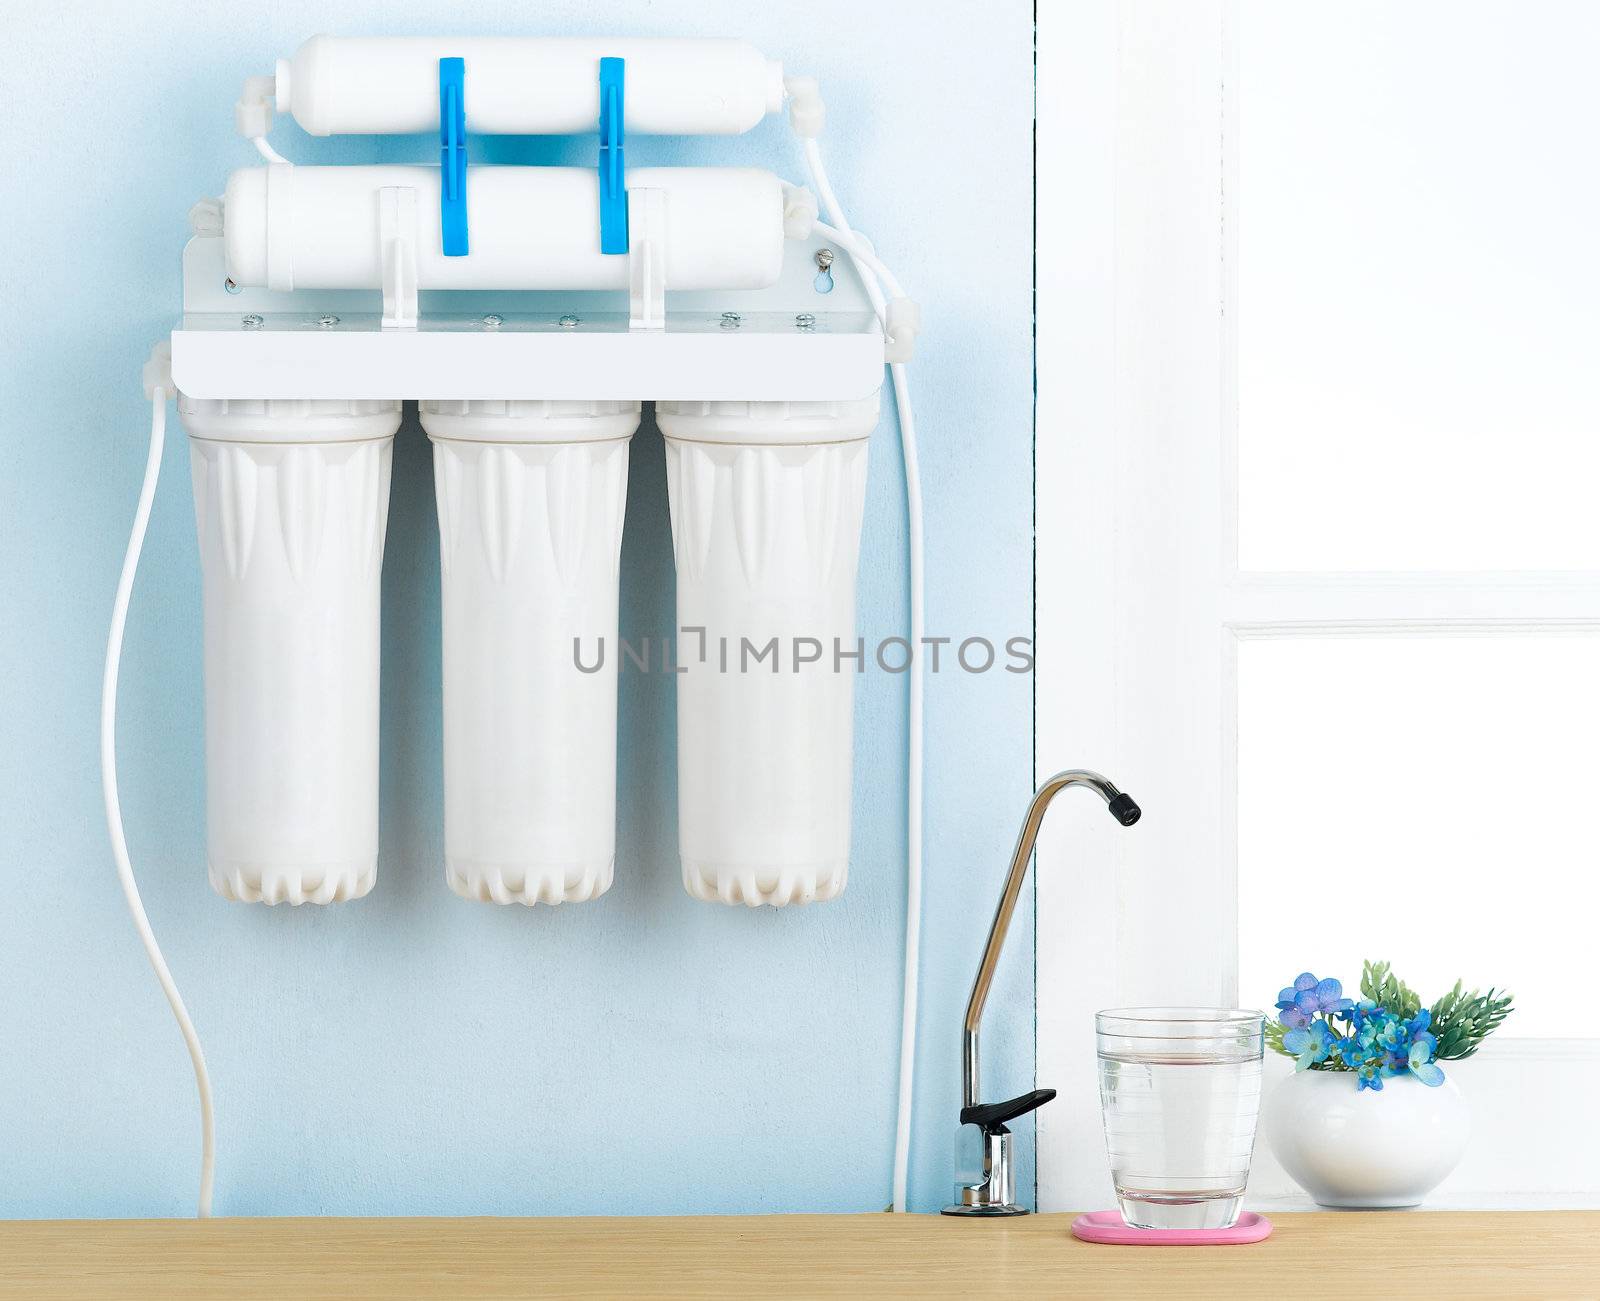 Home water filter to purify your drinking water